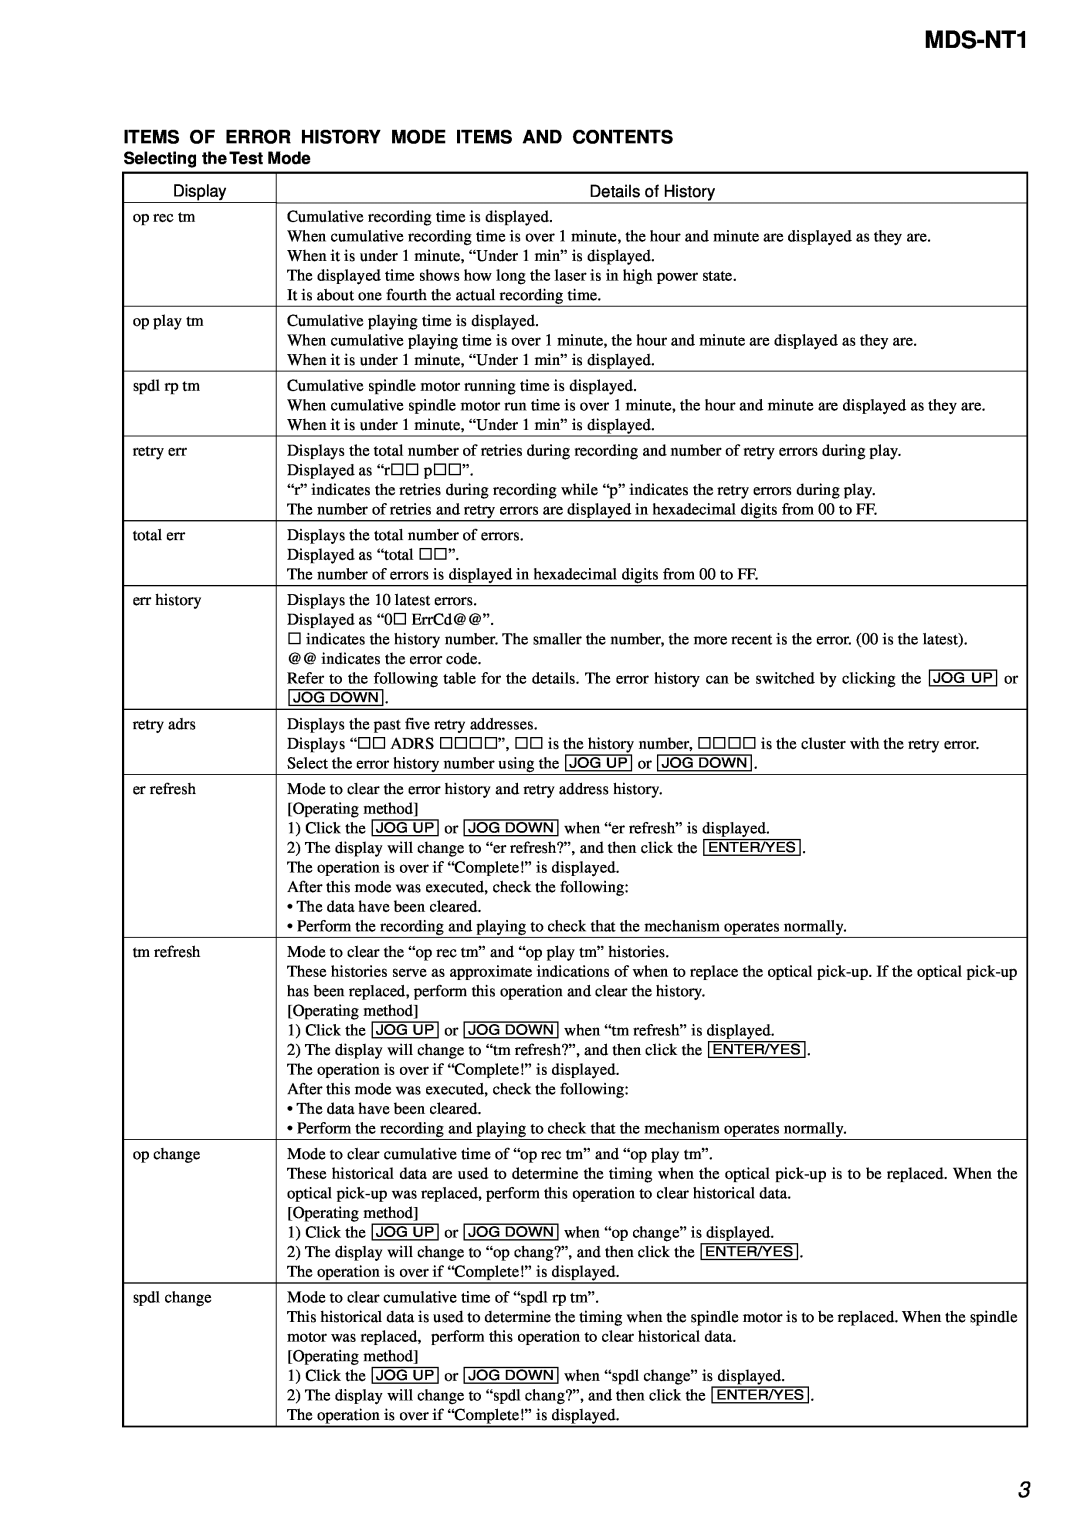 Sony MDS-NT1 service manual Items Of Error History Mode Items And Contents, Jog Down, Selecting the Test Mode 